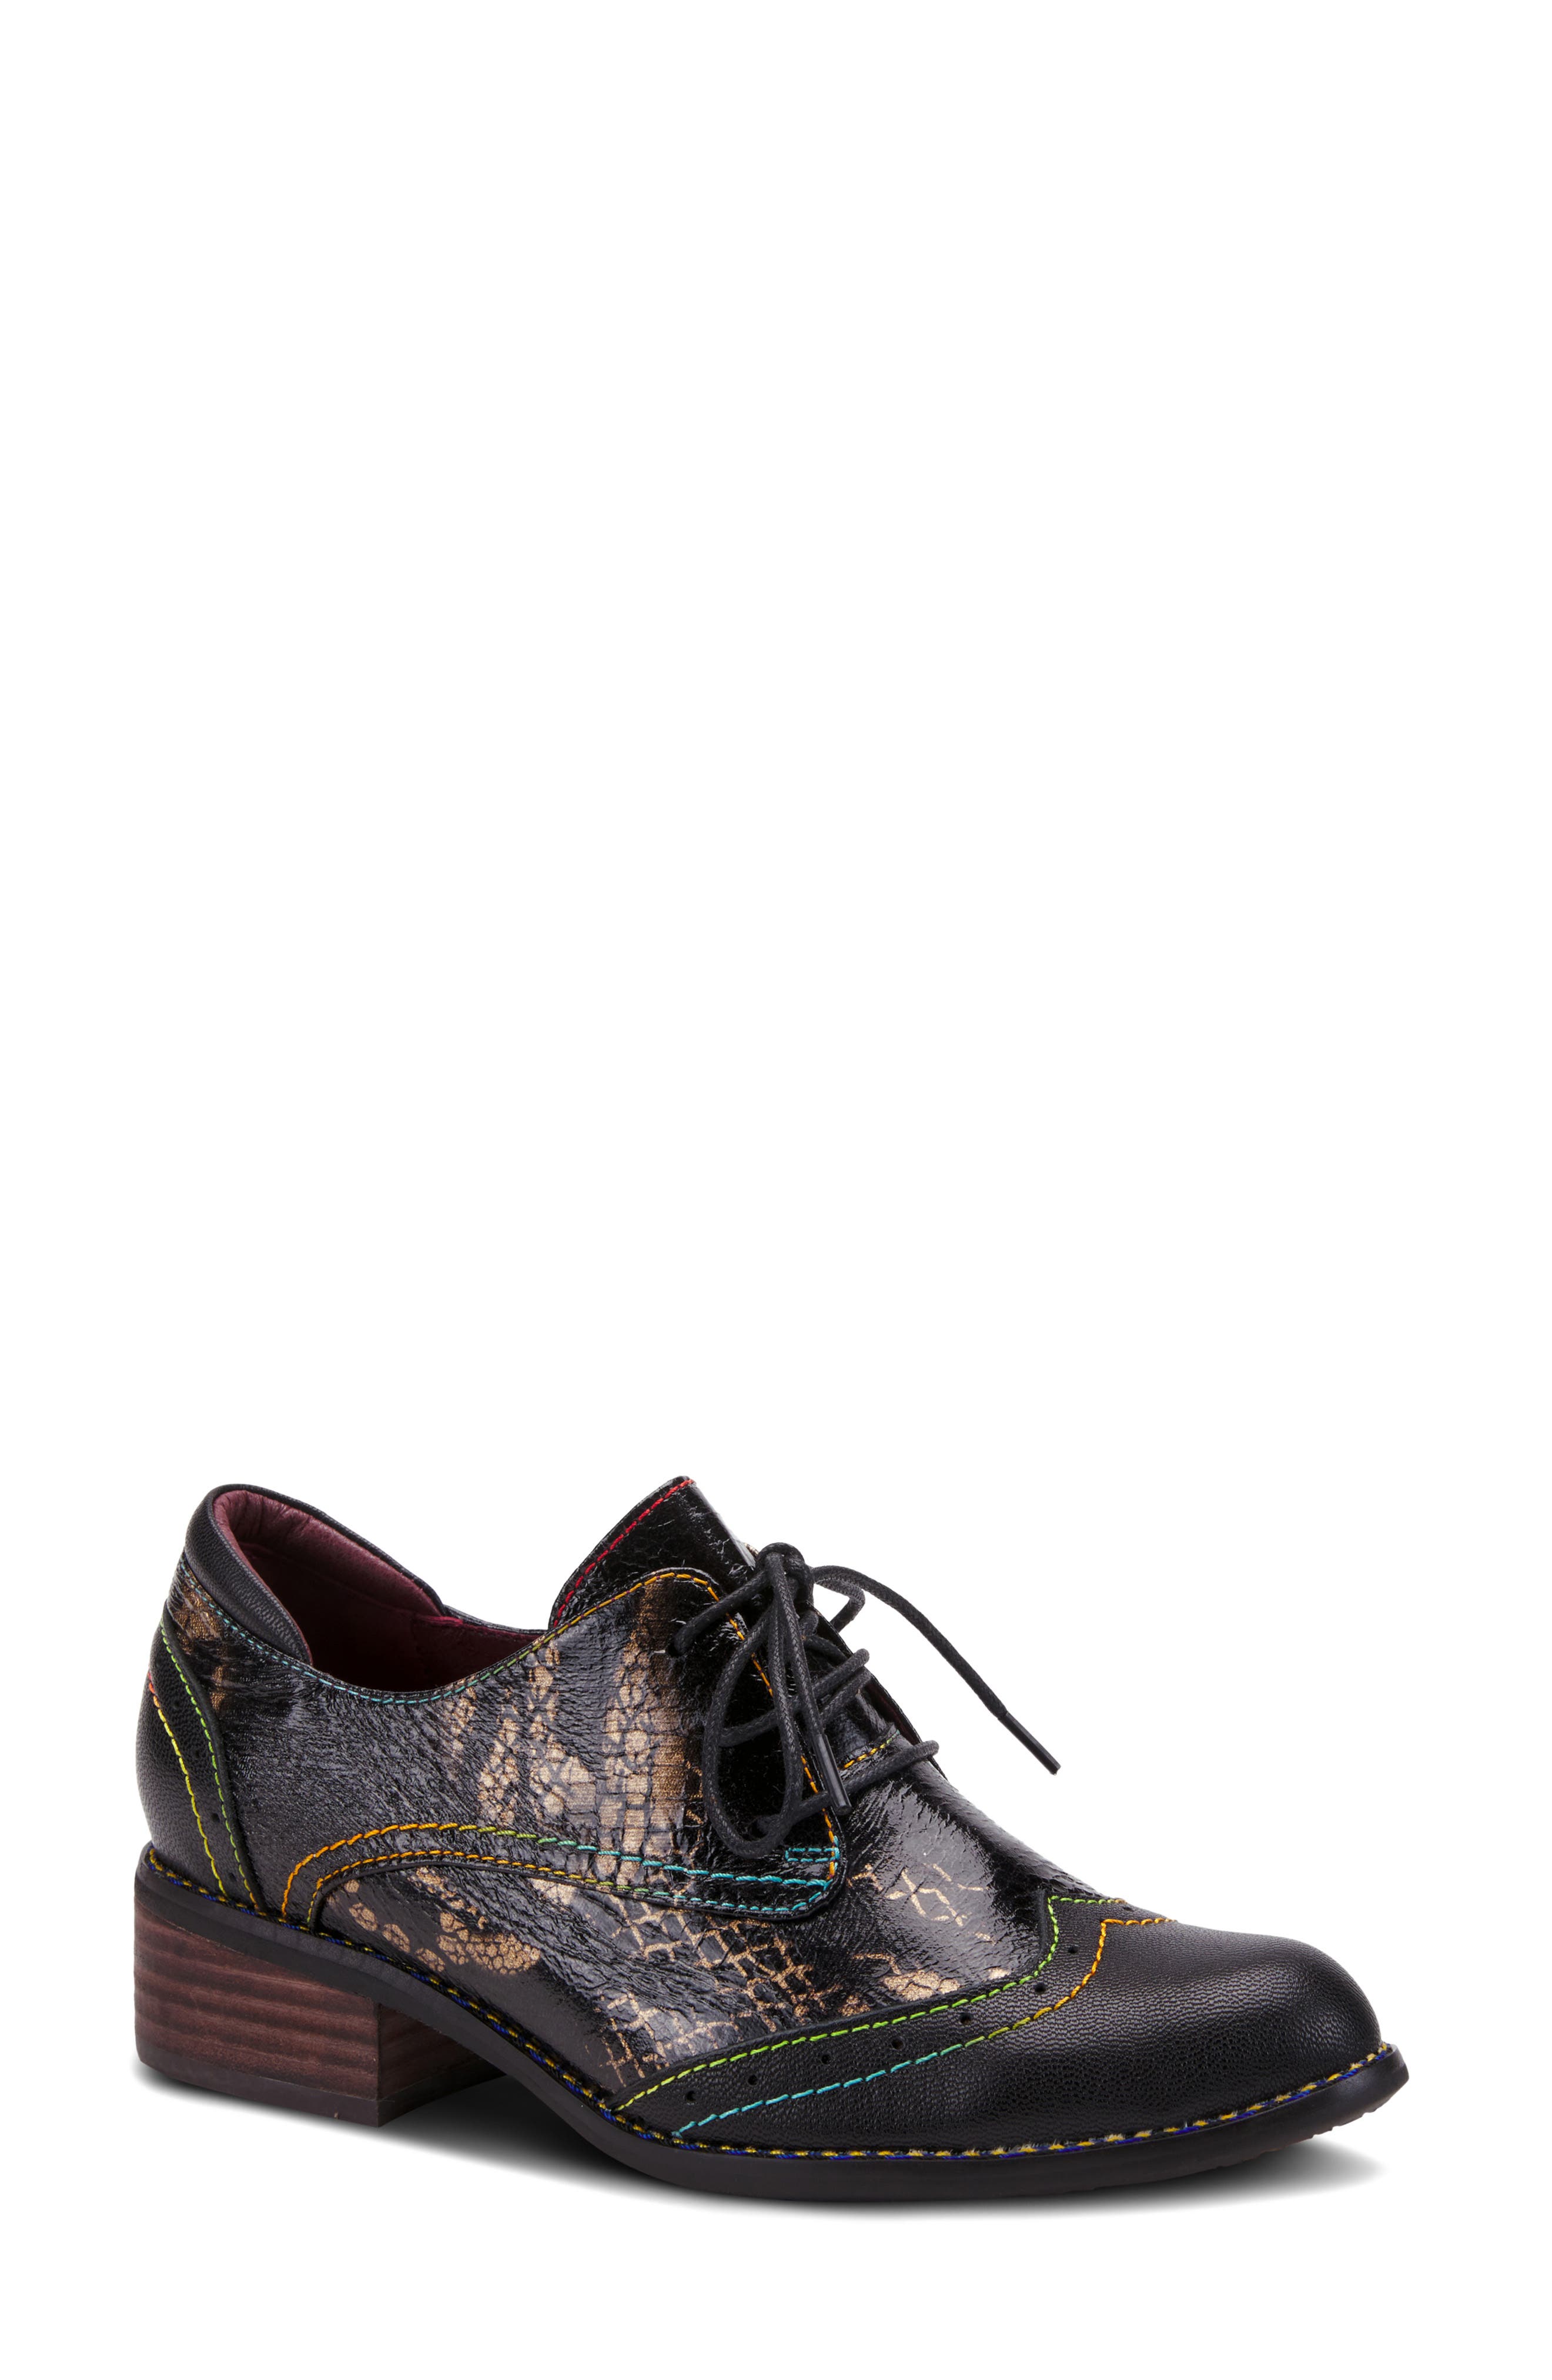 Women's Oxfords Shoes | Nordstrom